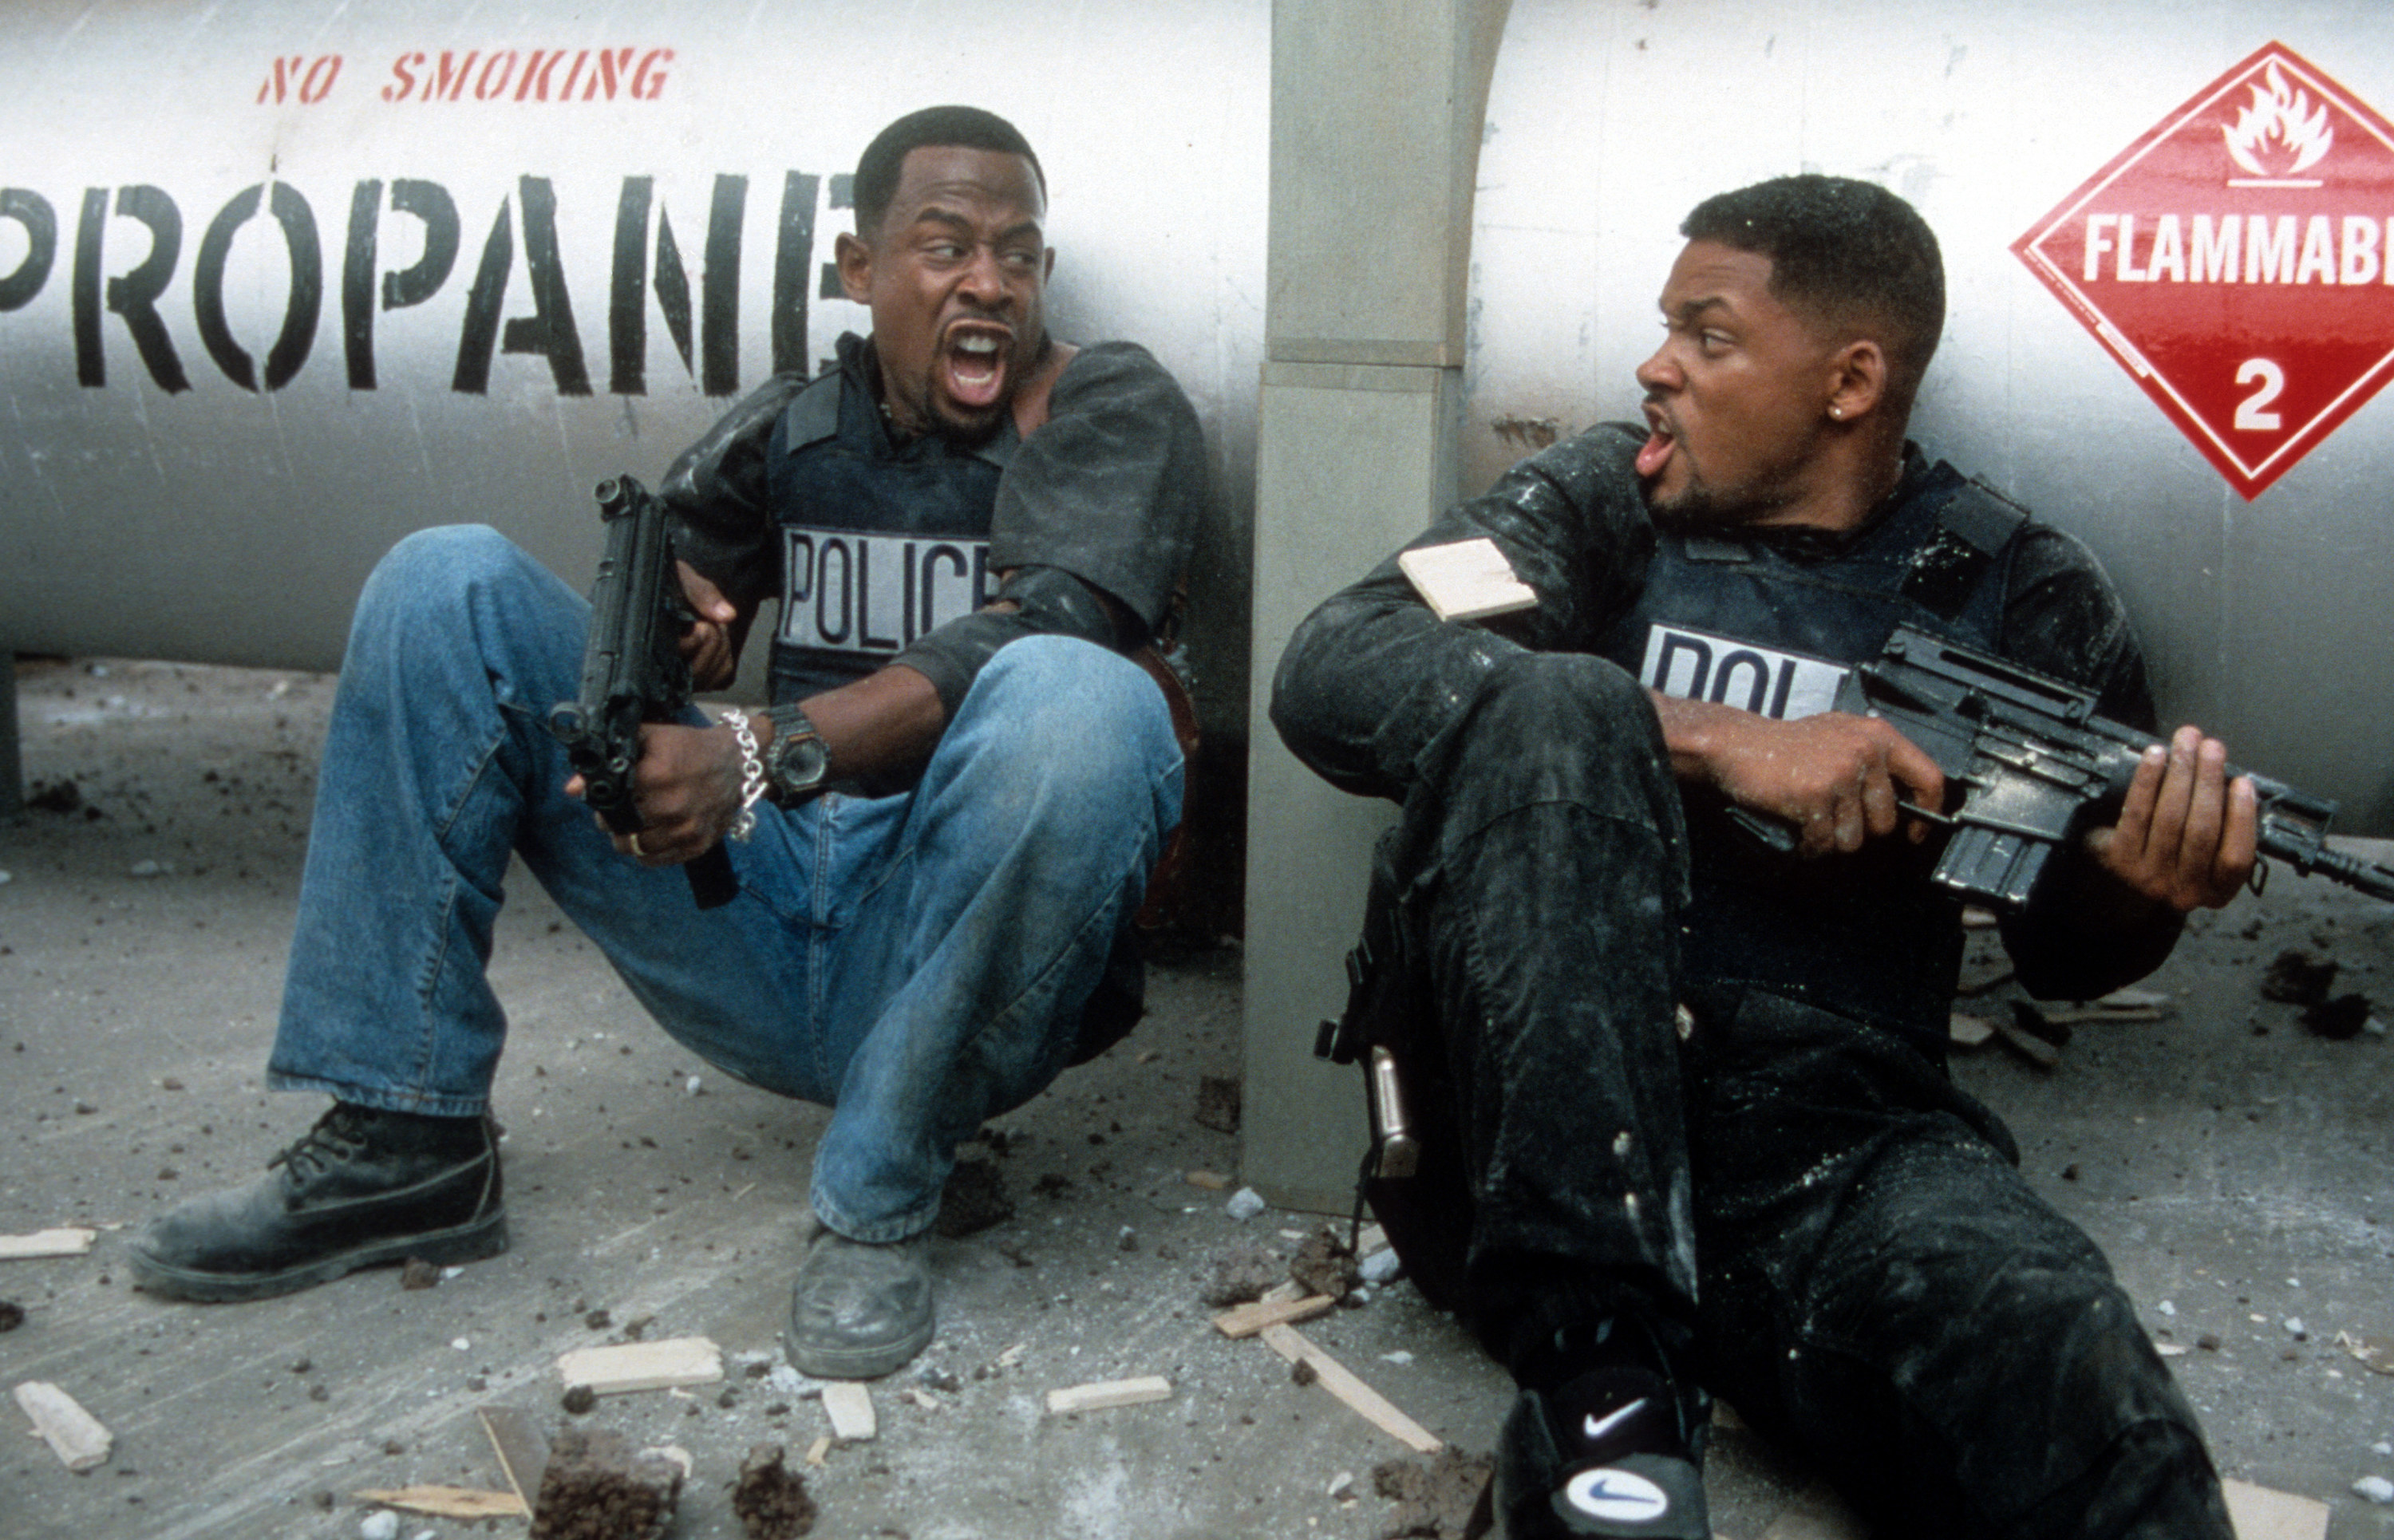 Martin Lawrence and Will Smith yelling at each other while holding machine guns to defend themselves in a scene from the film &#x27;Bad Boys&#x27;, 1995